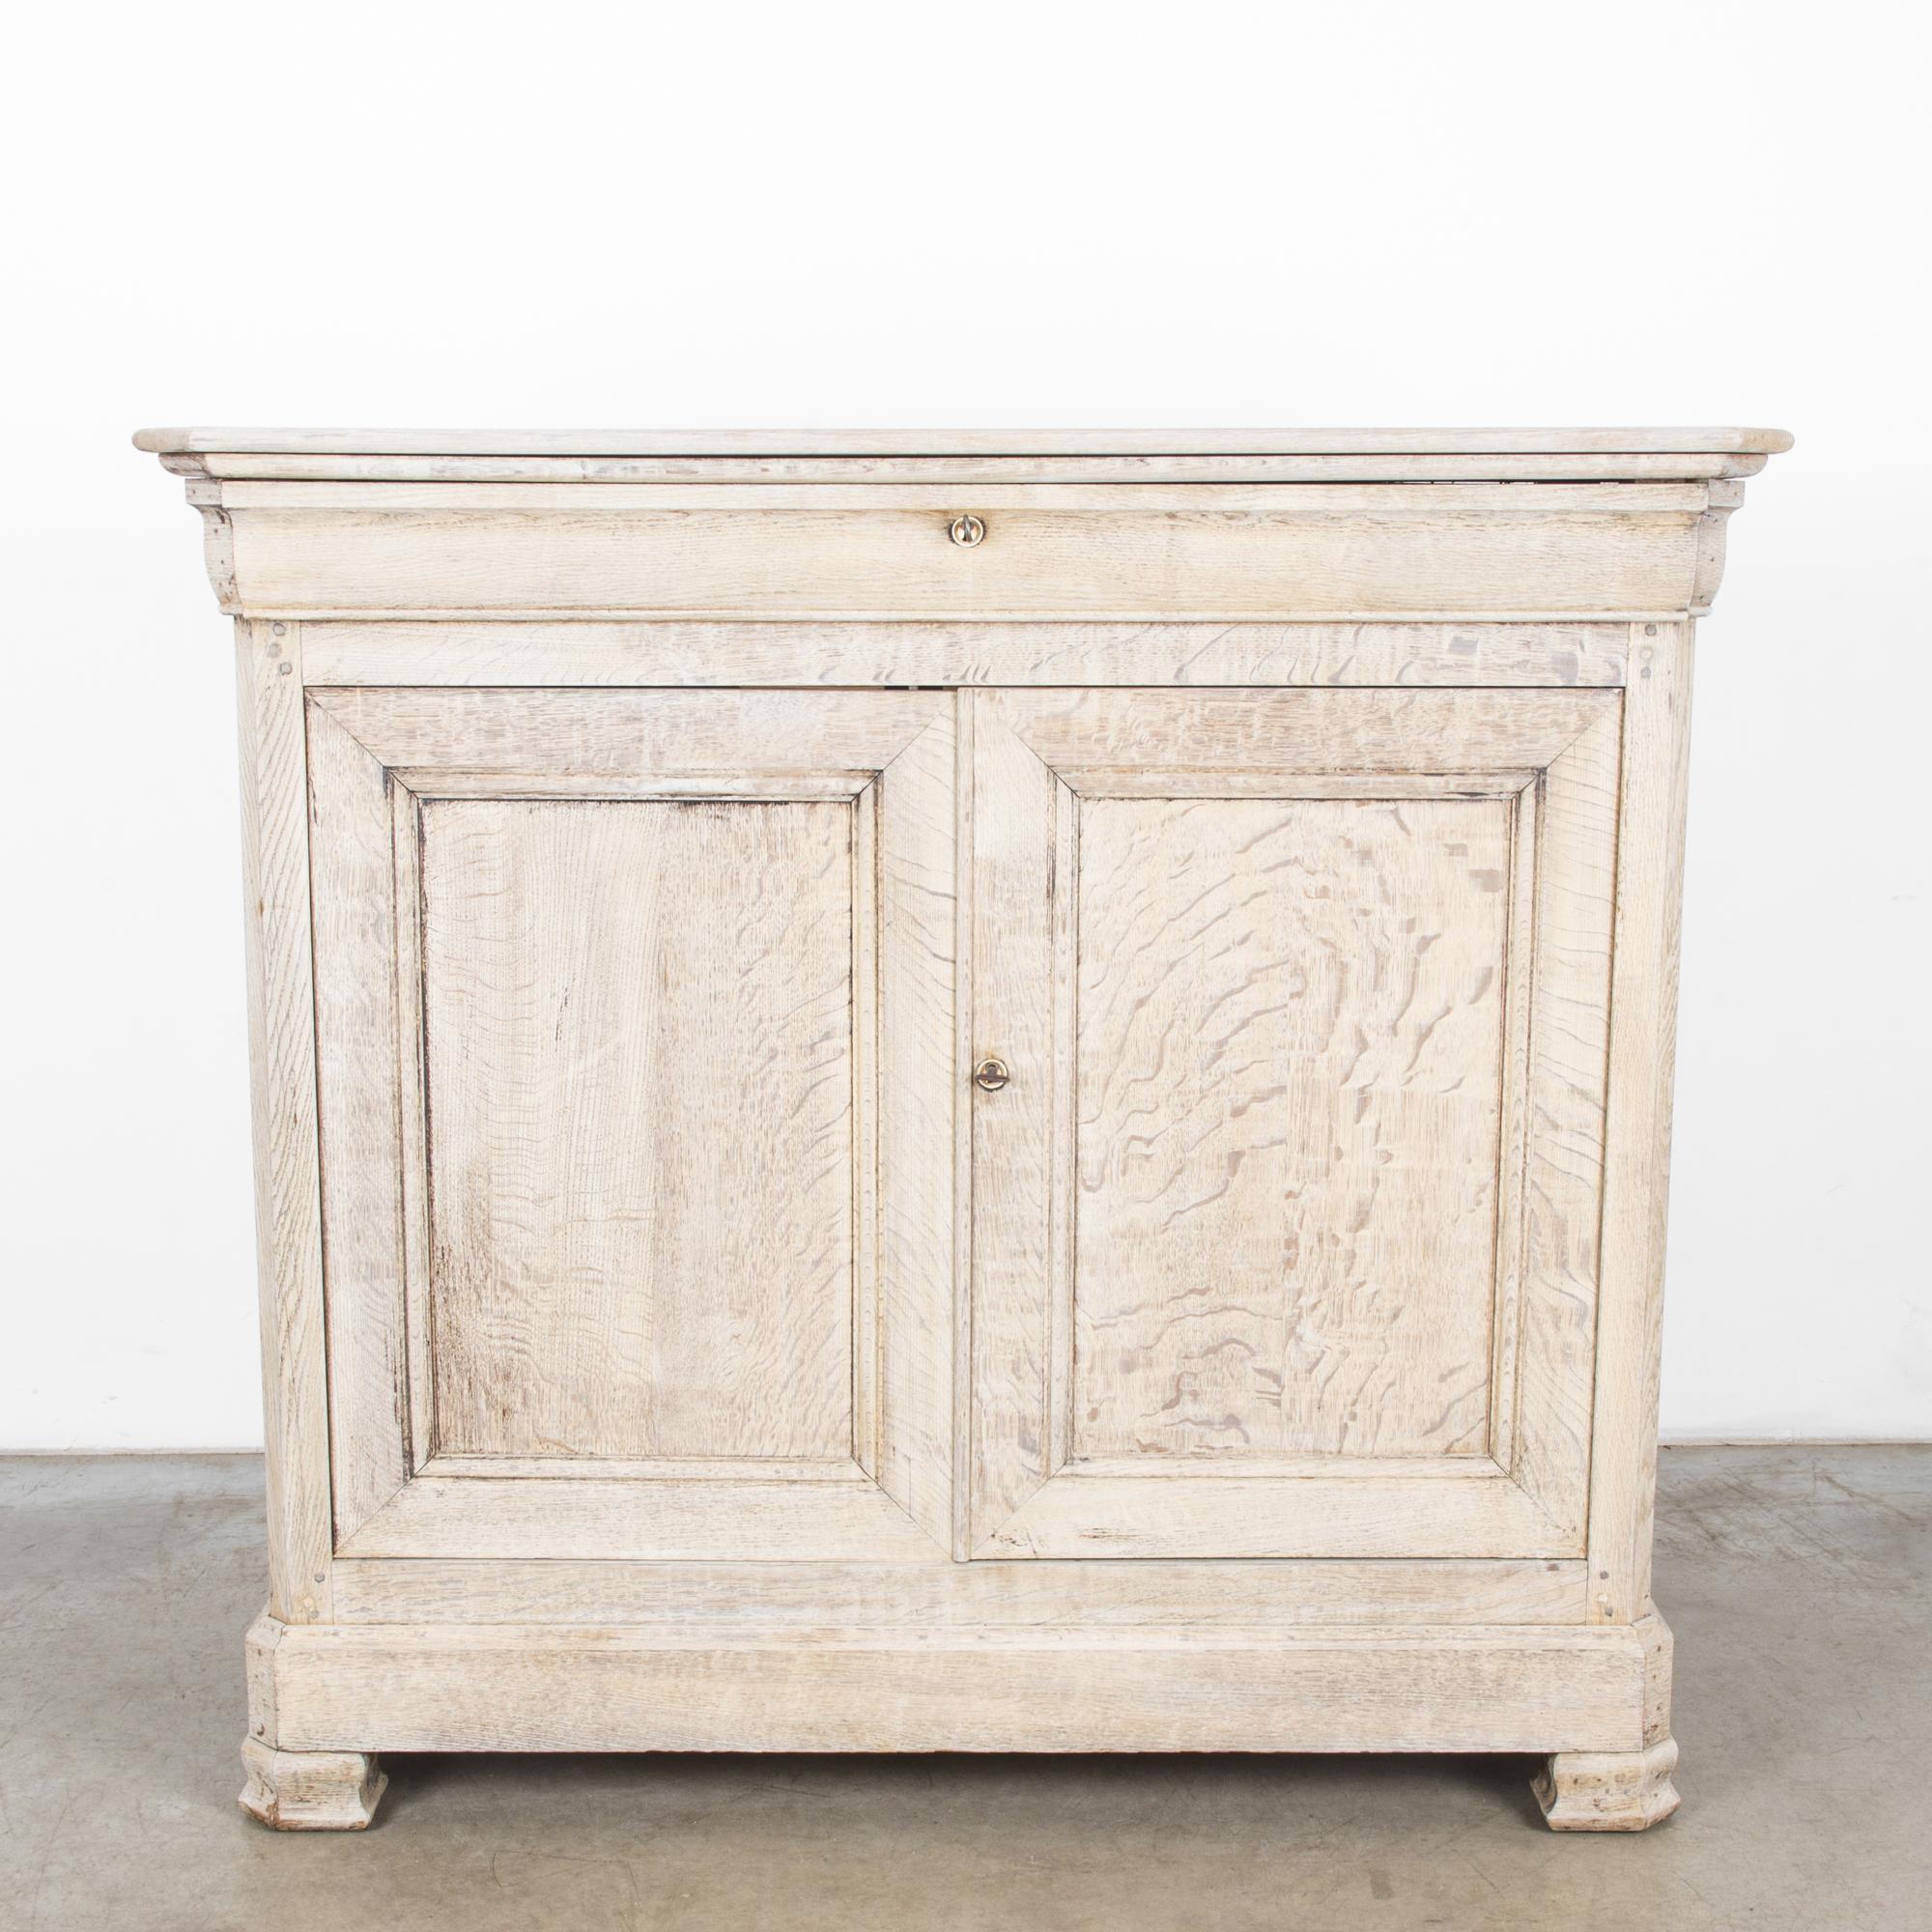 This bleached oak buffet with a stepped top was made in France, circa 1880, and brings the understated elegance of a rustic country house. The buffet consists of a long drawer above and double doors, which open to reveal a spacious storage